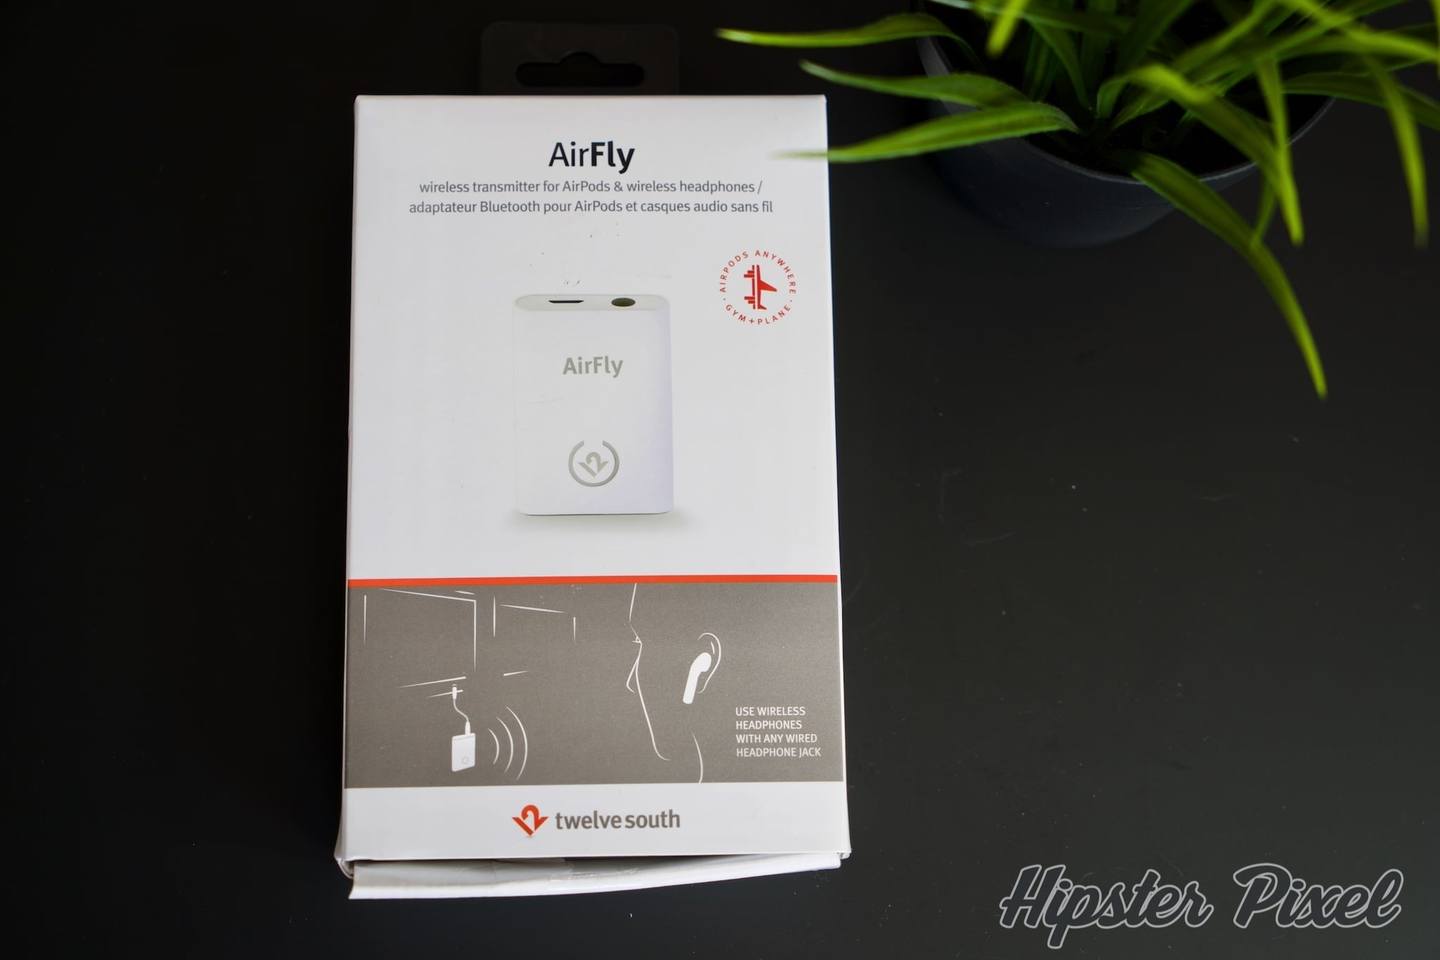 AirFly box, great looking!